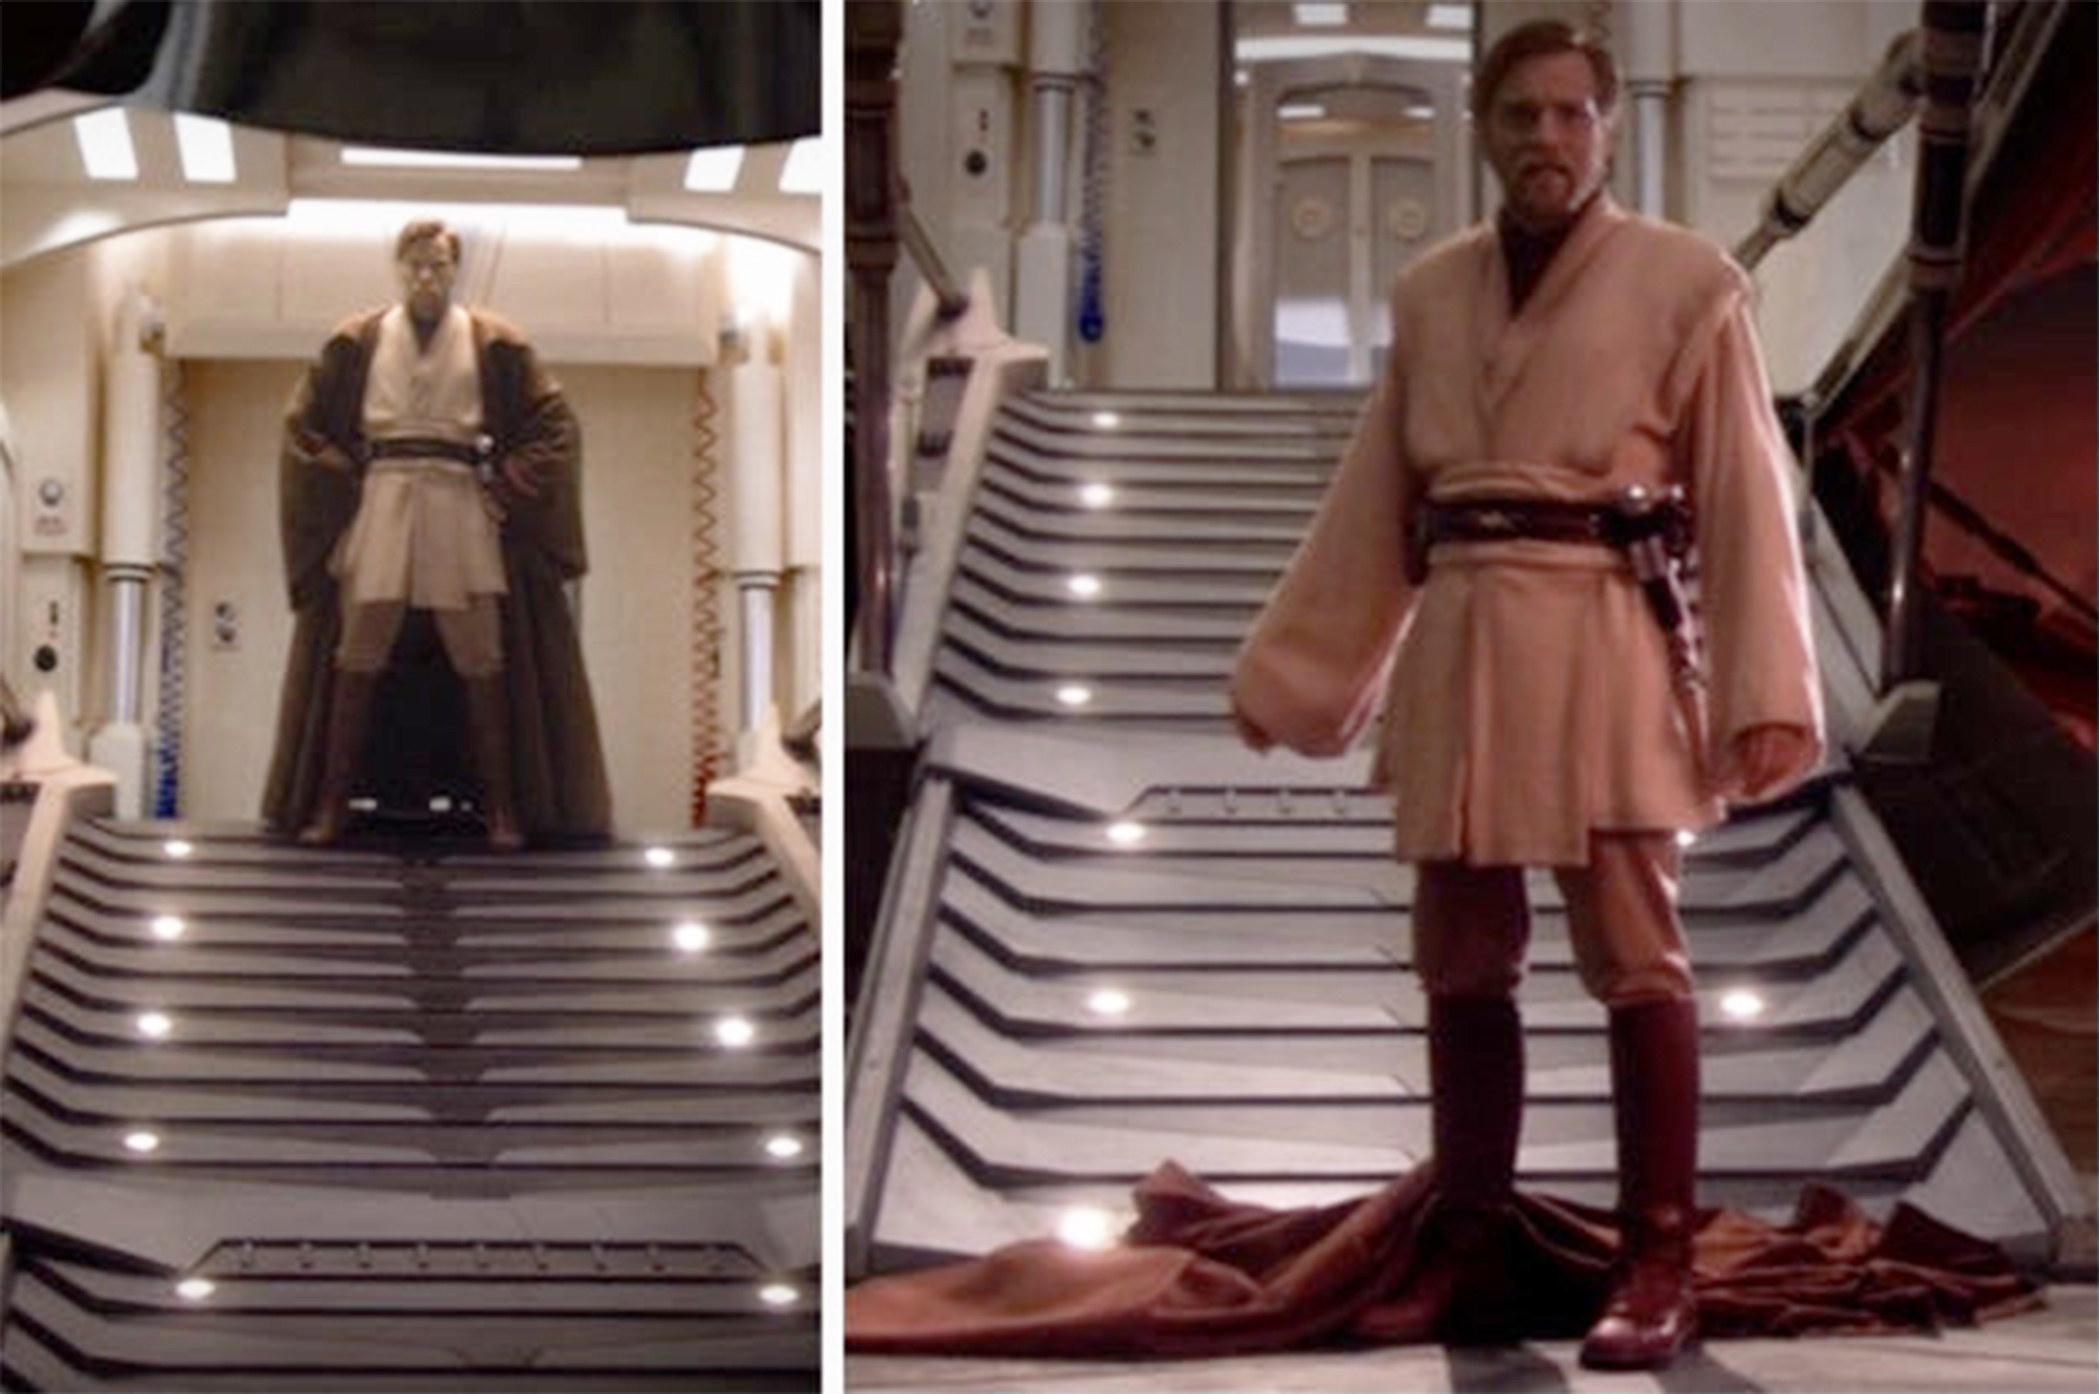 Left: Ewan McGregor as Obi-Wan Kenobi wears a robe and stands in the walkway of a spaceship in &quot;Revenge of the Sith&quot; Right: Ewan McGregor as Obi-Wan Kenobi stands at the base of a spaceship with his robe on the floor behind him in &quot;Revenge of the Sith&quot;